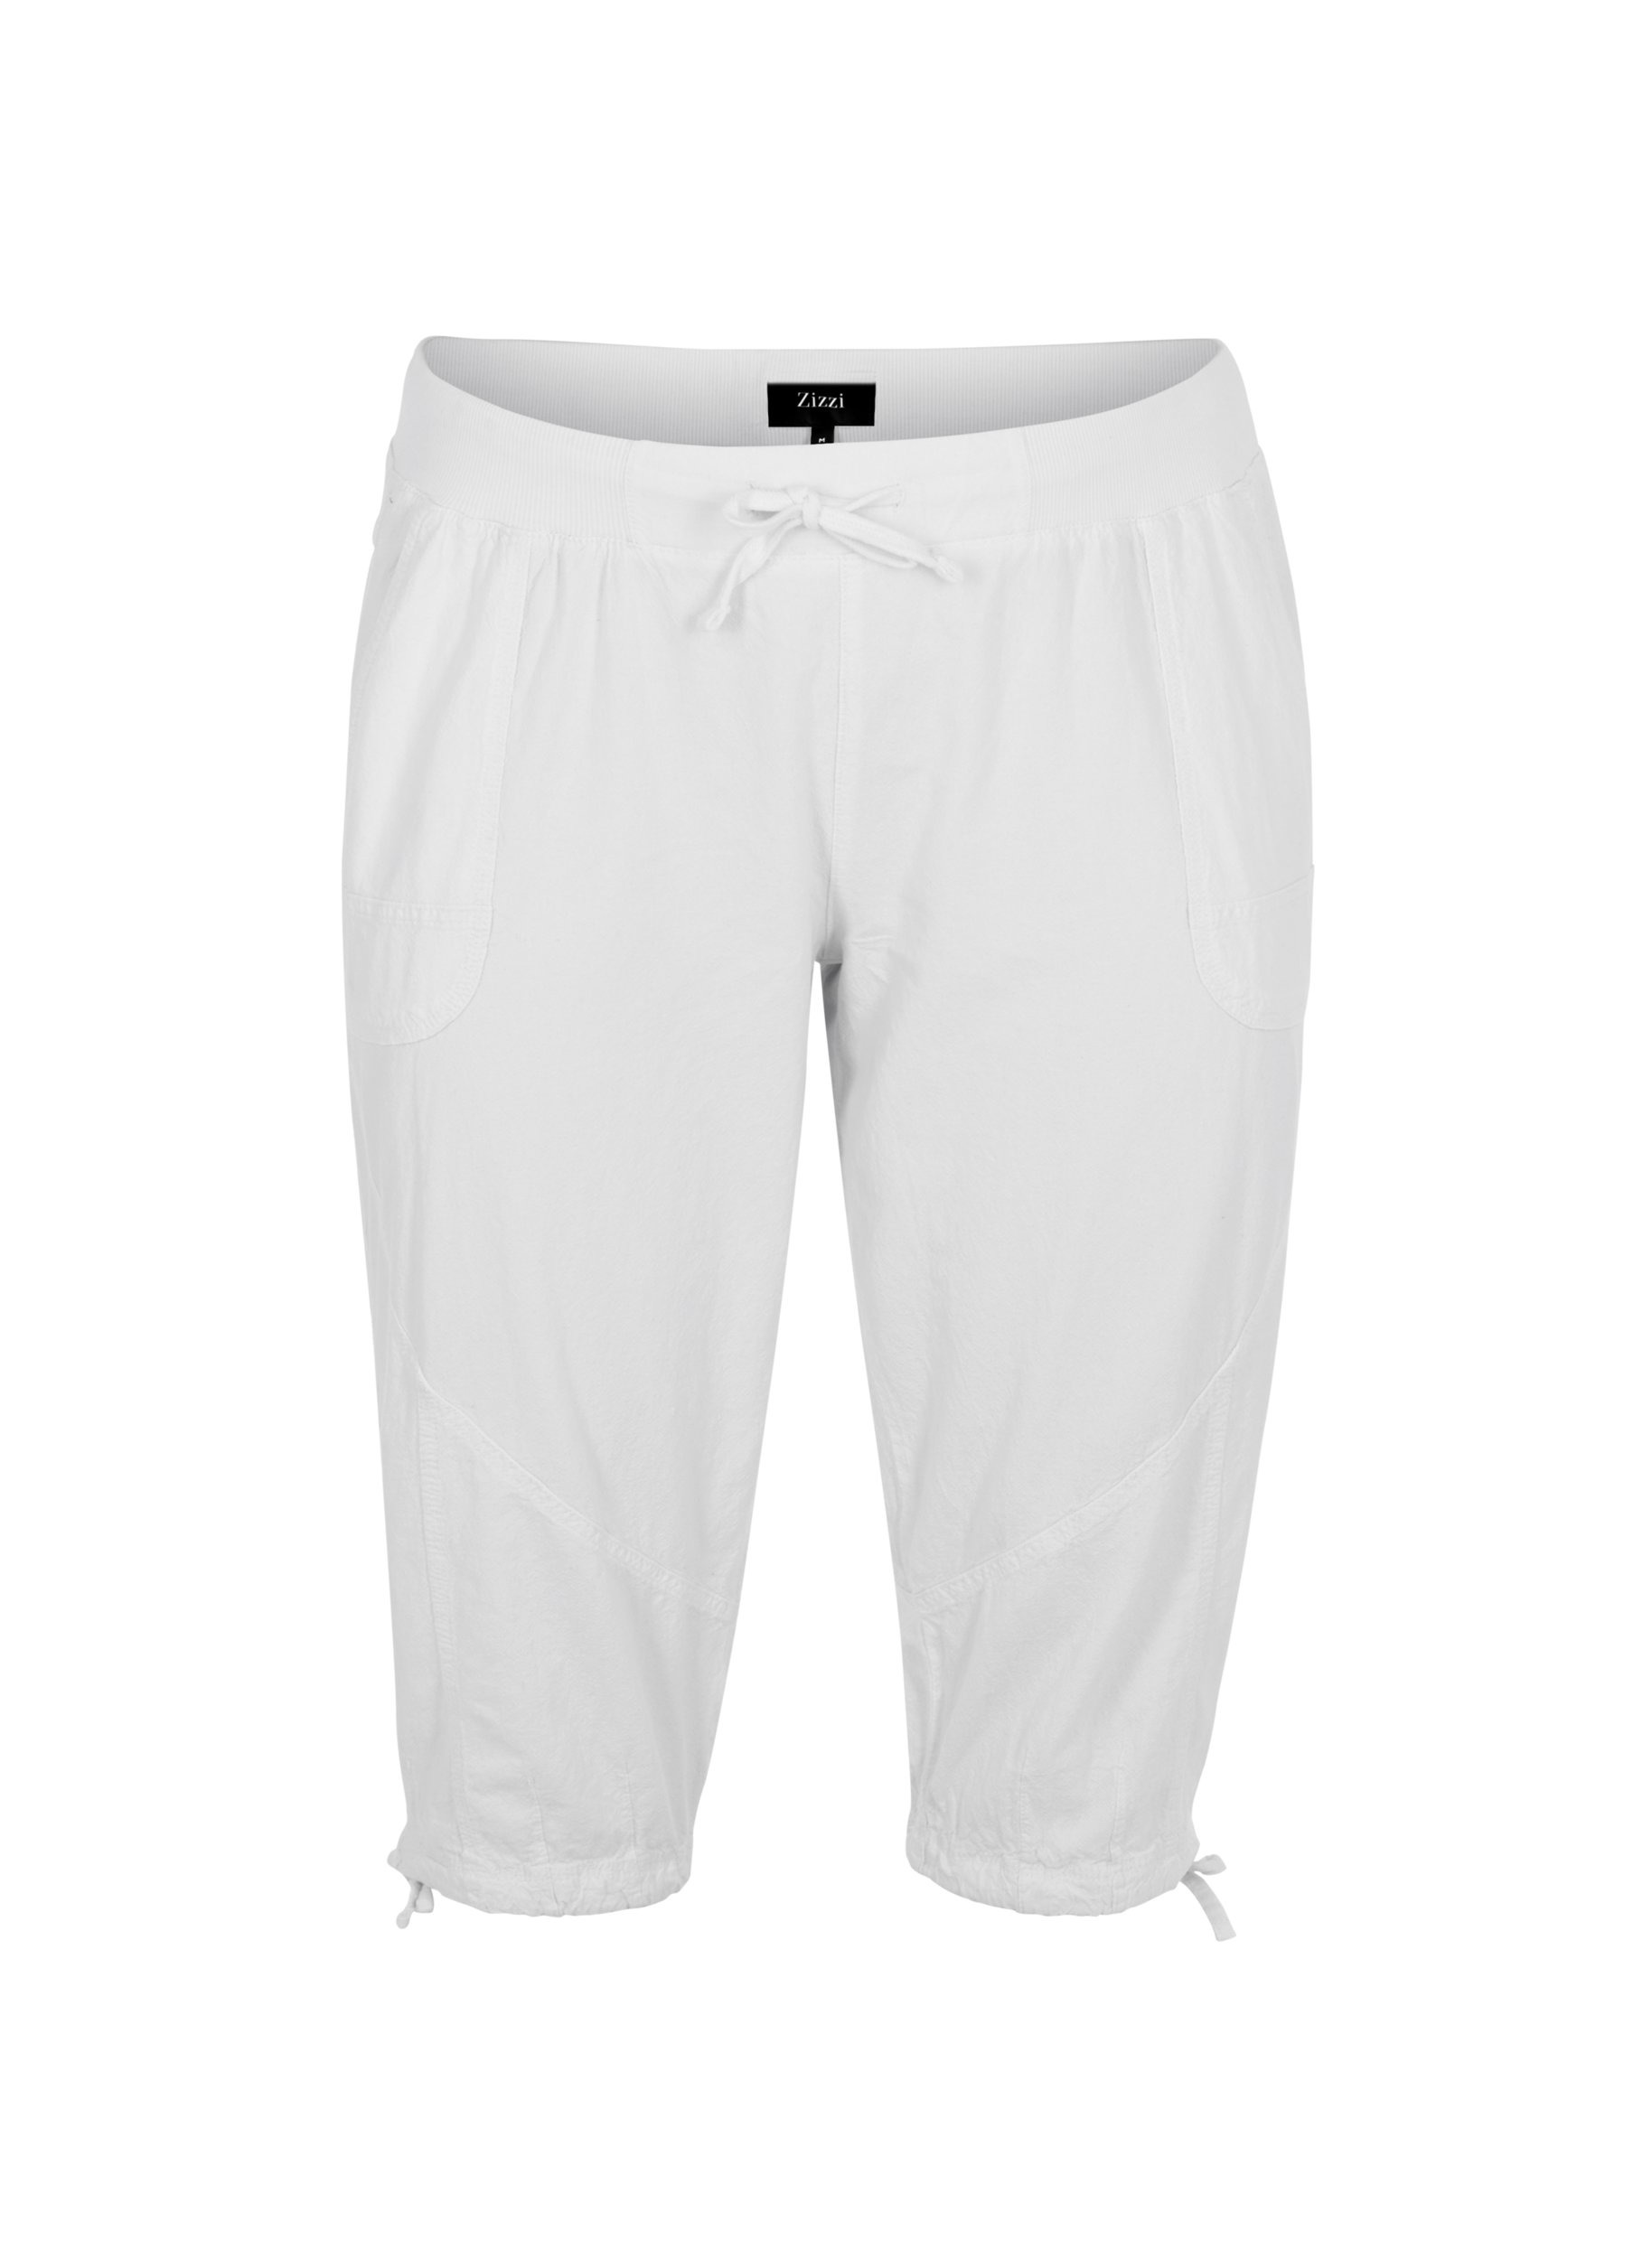 Løse knickers i bomuld, Bright White